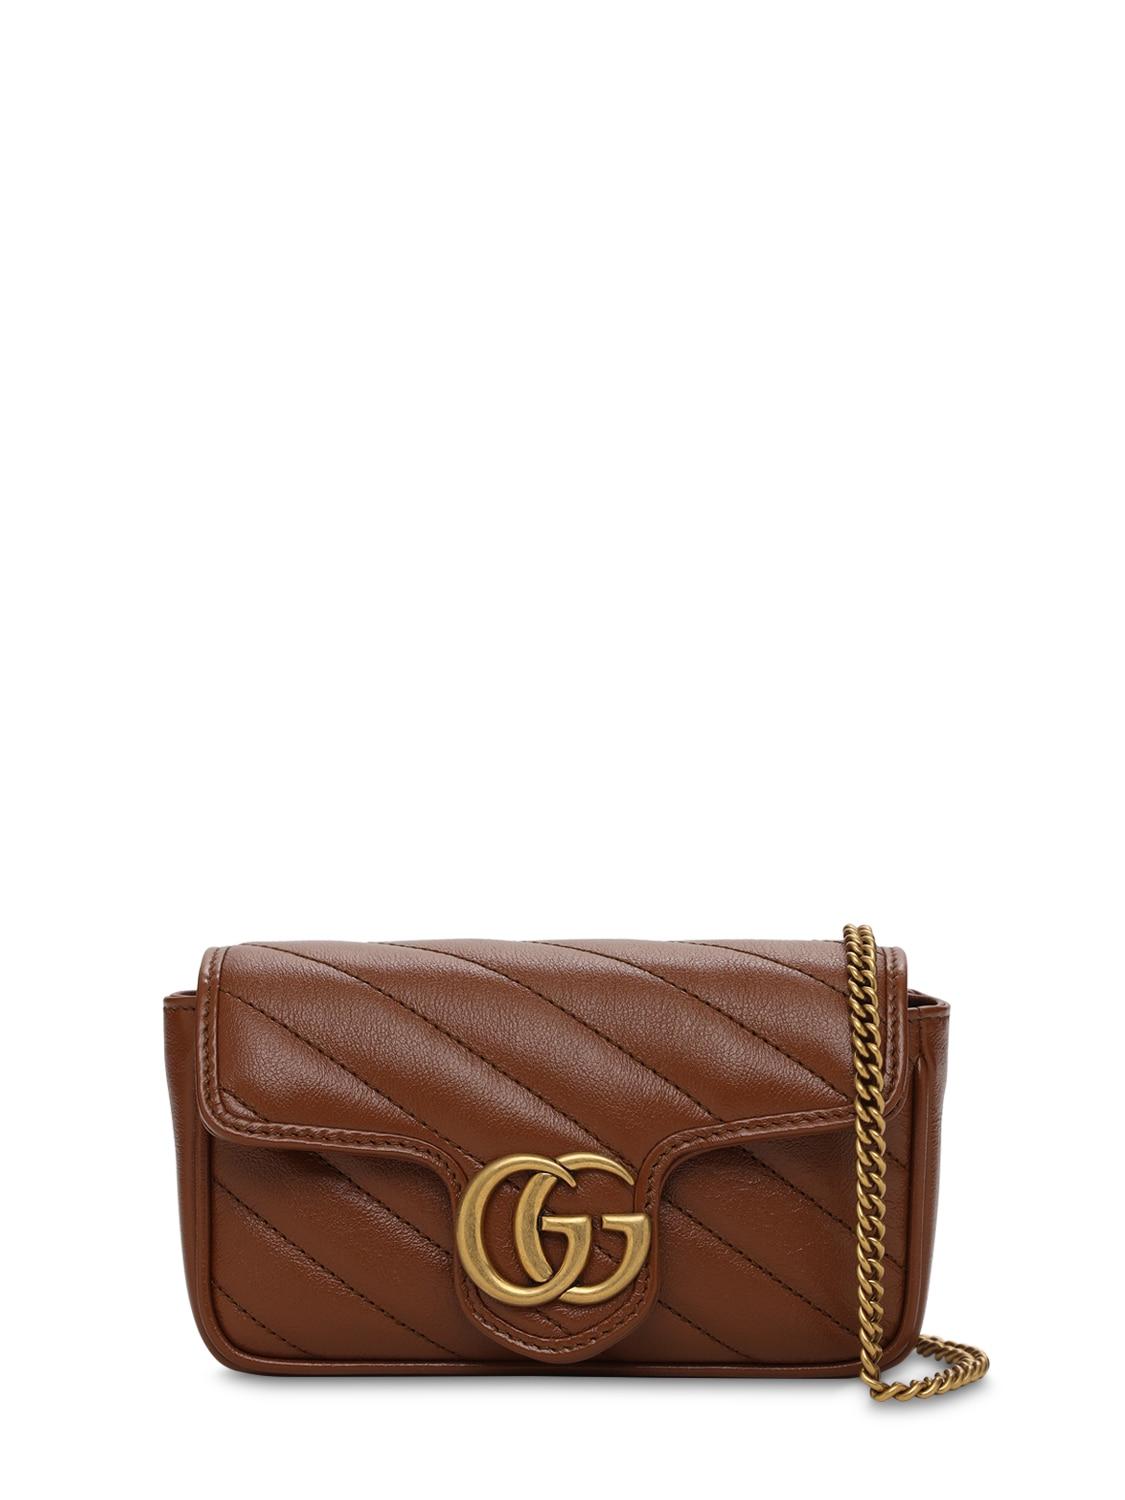 Gucci Super Mini Gg Marmont Leather Bag in Brown | Lyst